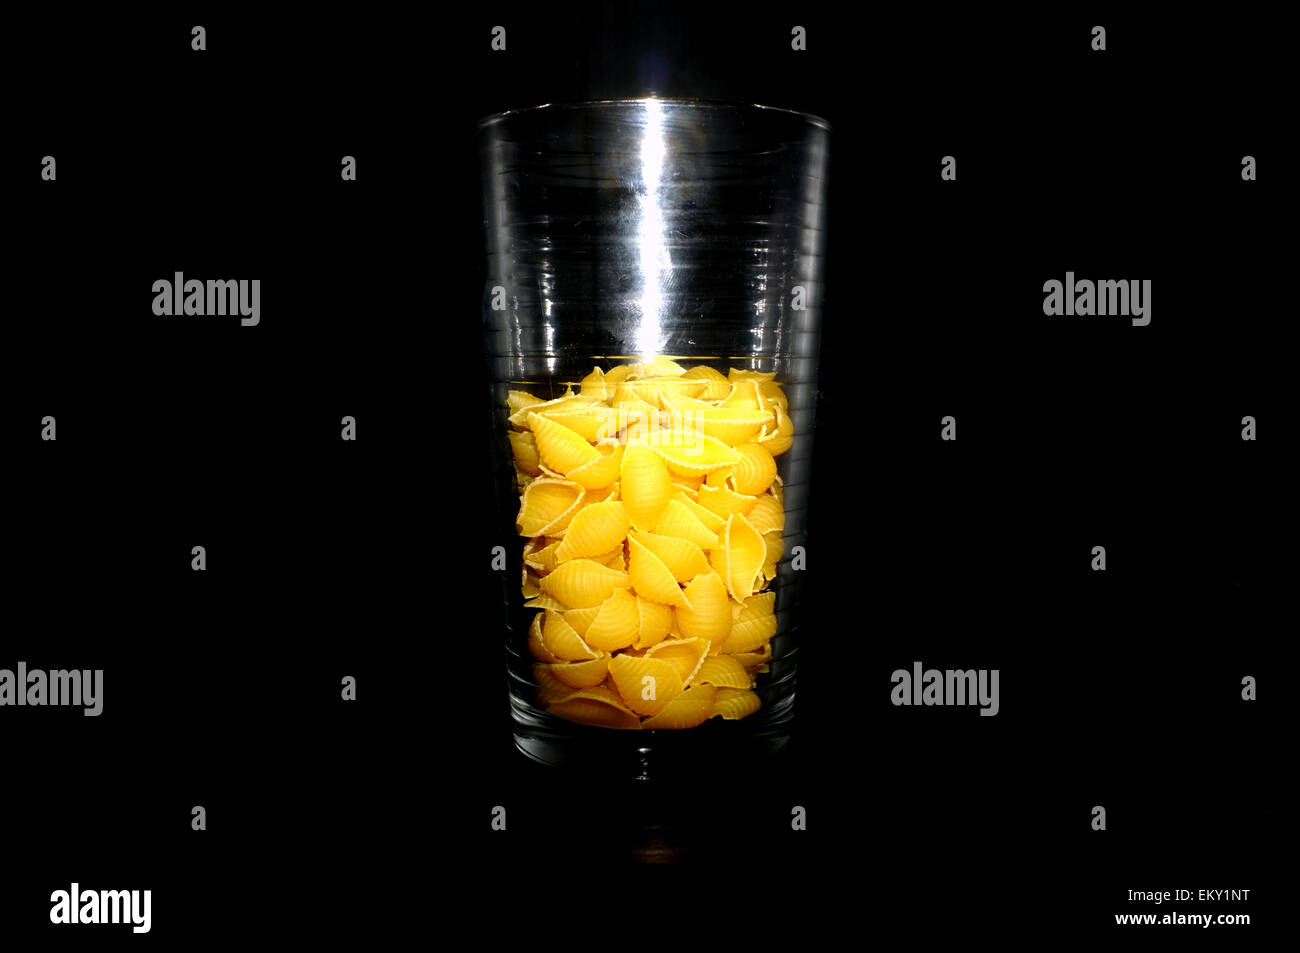 A glass half full/half empty of pasta shells against a black background. Stock Photo